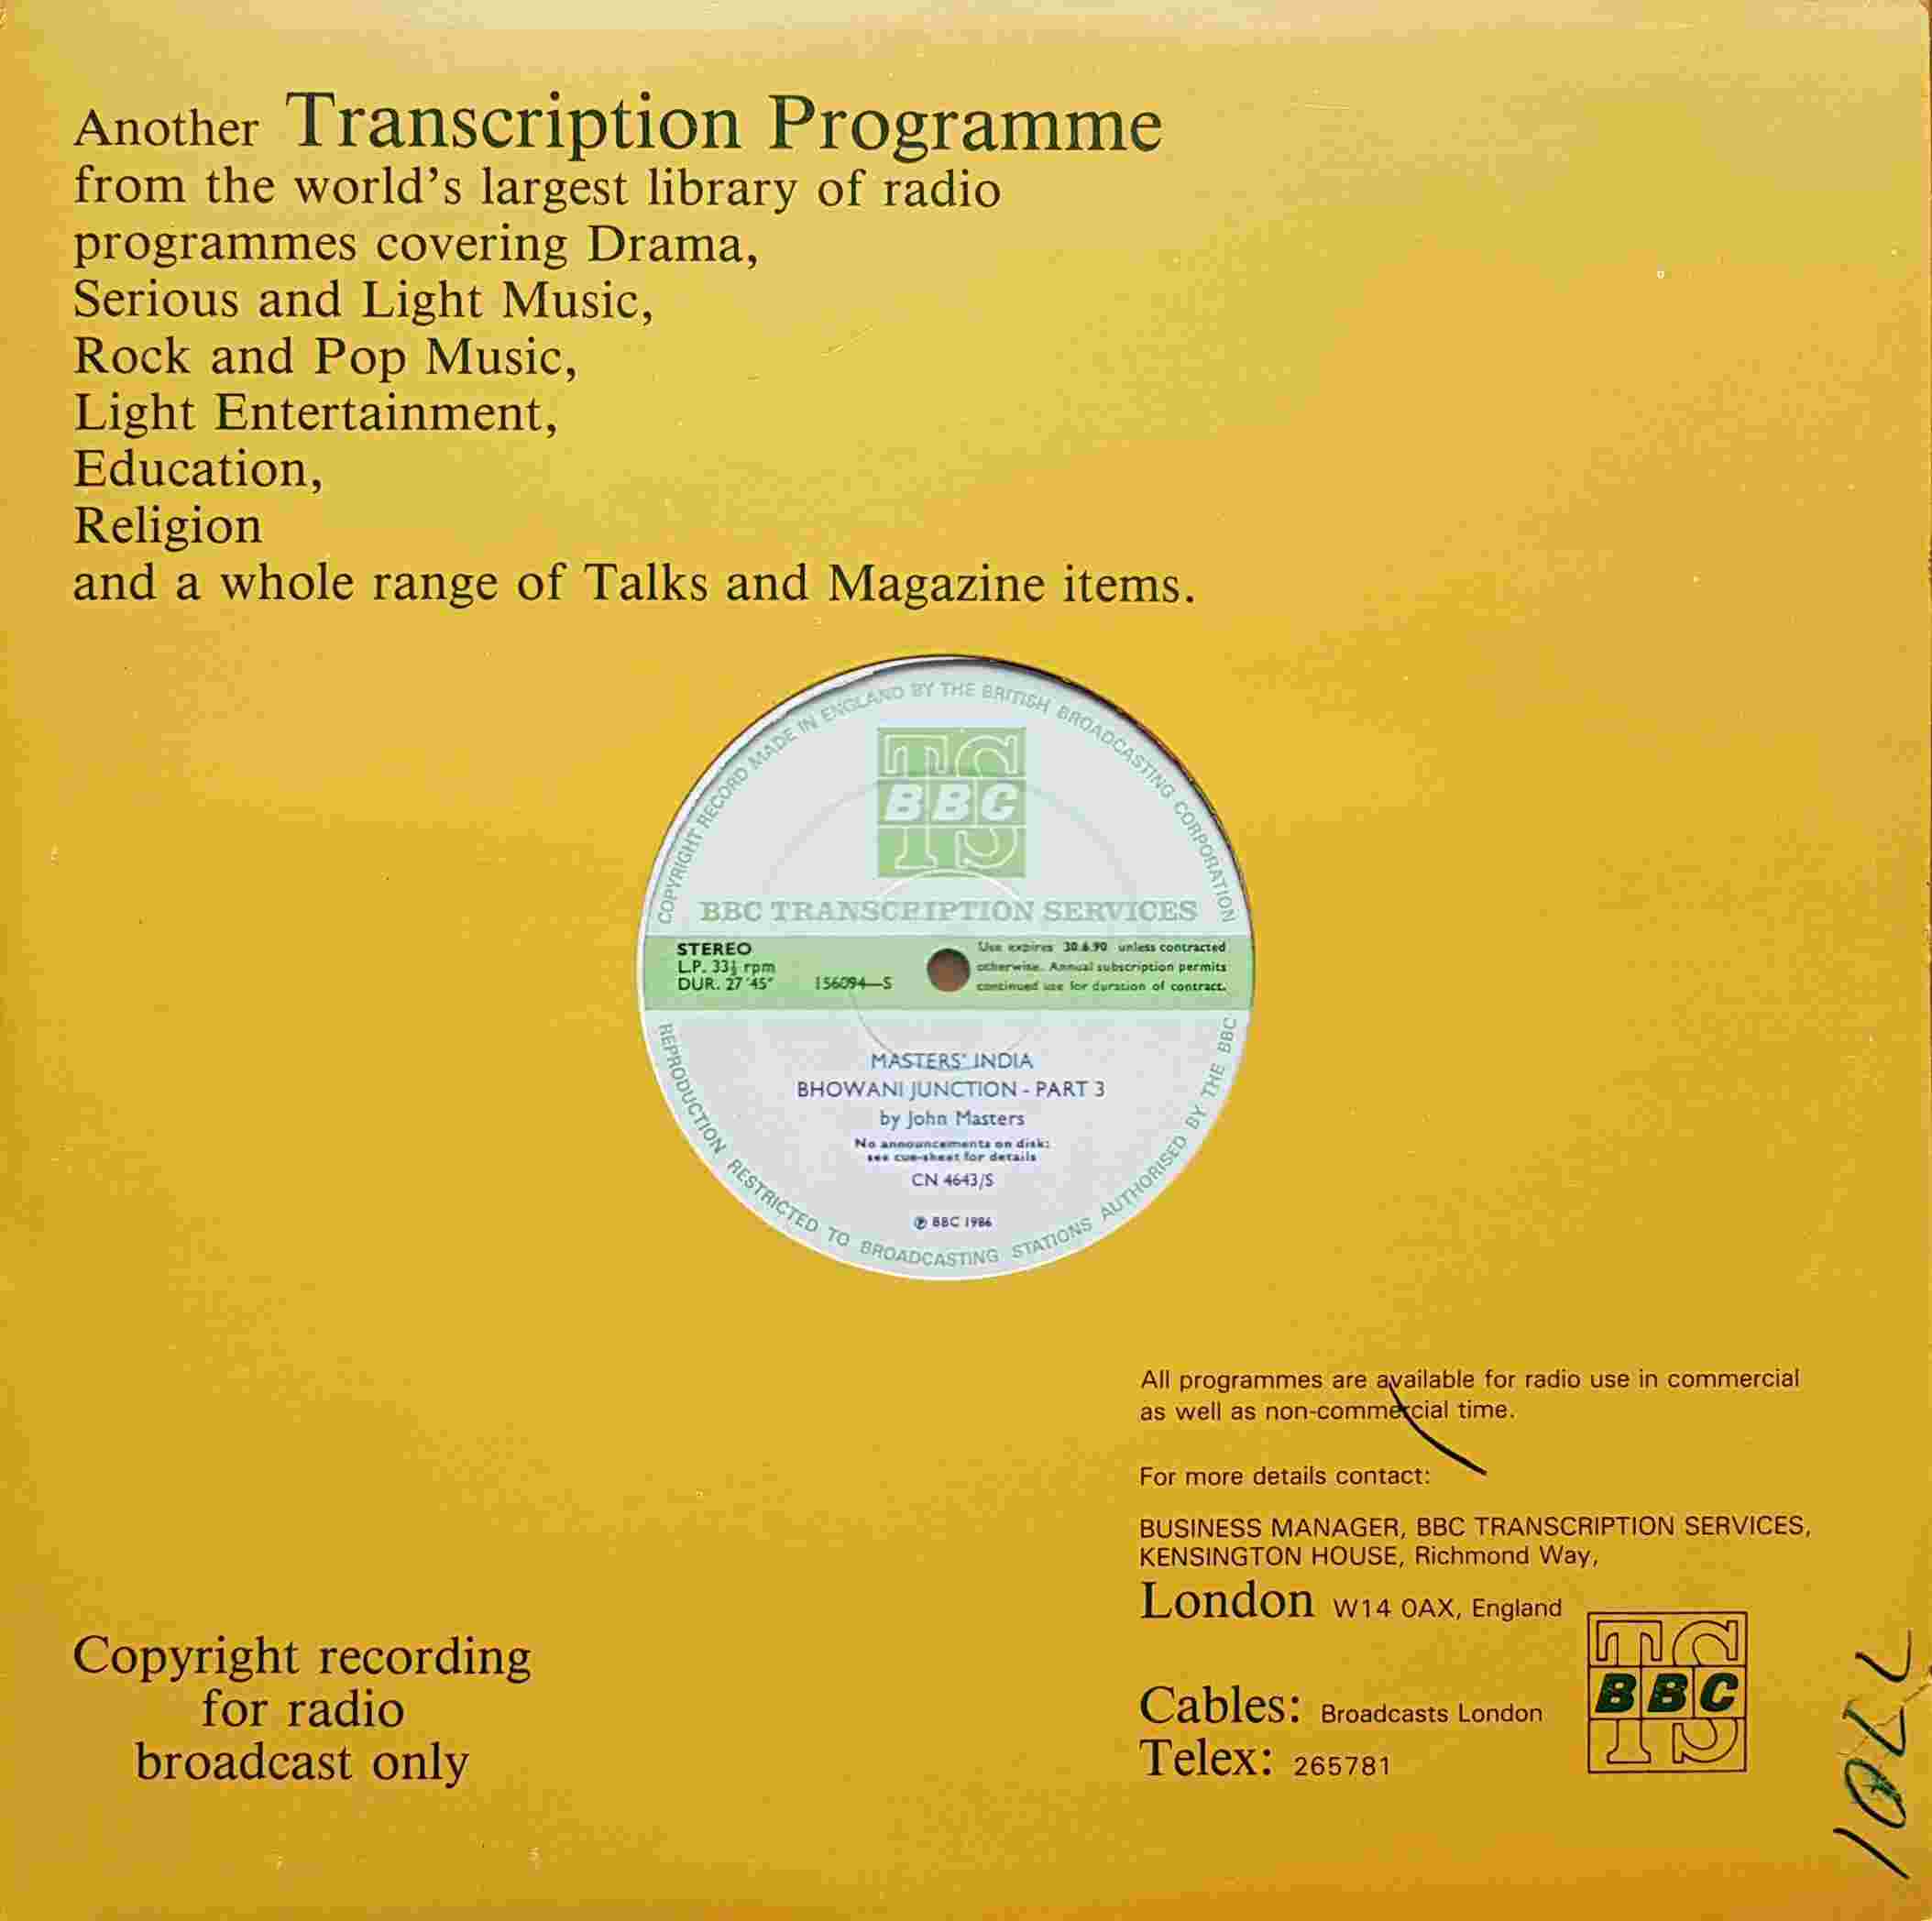 Picture of CN 4643 S 2 Masters' India Bhowani Junction - Parts 3 & 4 by artist John Masters from the BBC albums - Records and Tapes library